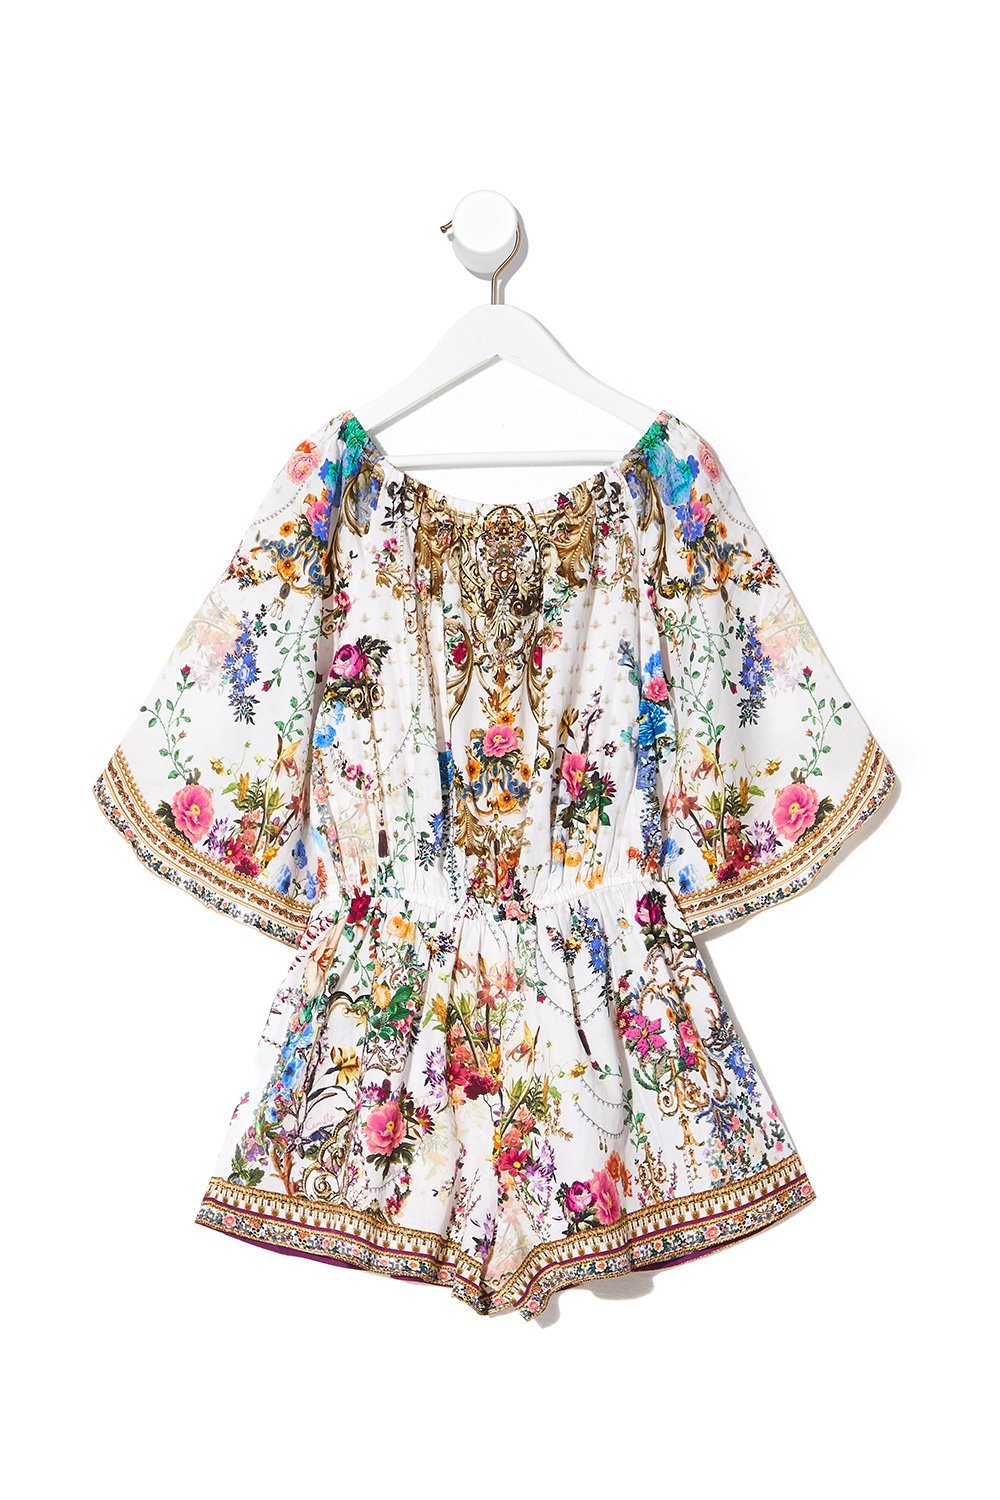 KIDS 3/4 FLARE SLEEVE PLAYSUIT 12-14 BY THE MEADOW